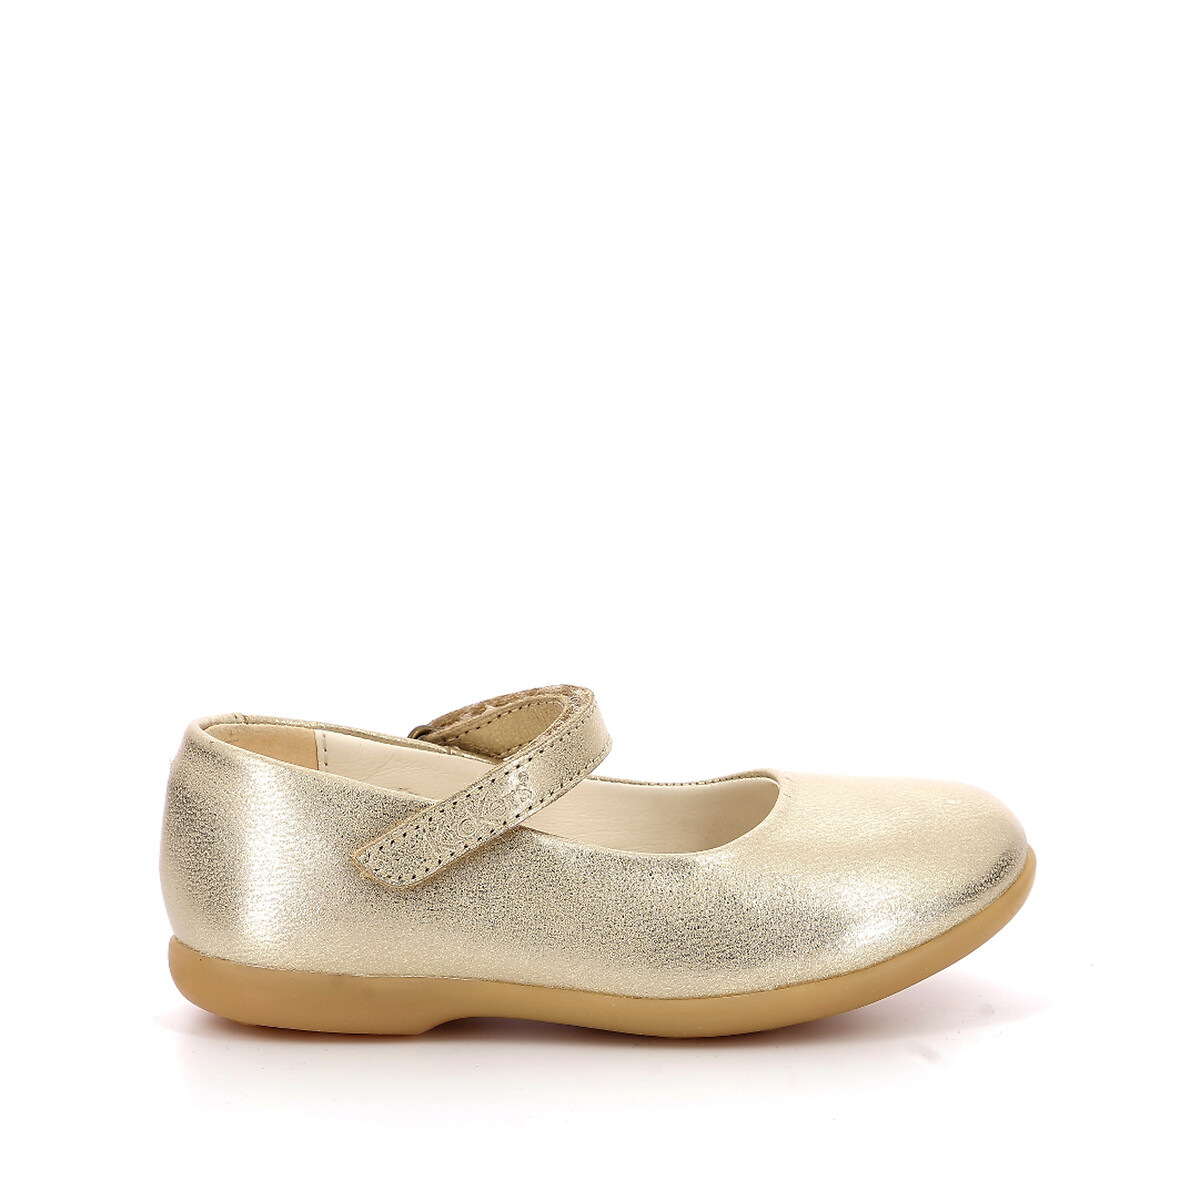 Kids Ambellie Ballet Pumps in Leather with Touch ’n’ Close Fastening